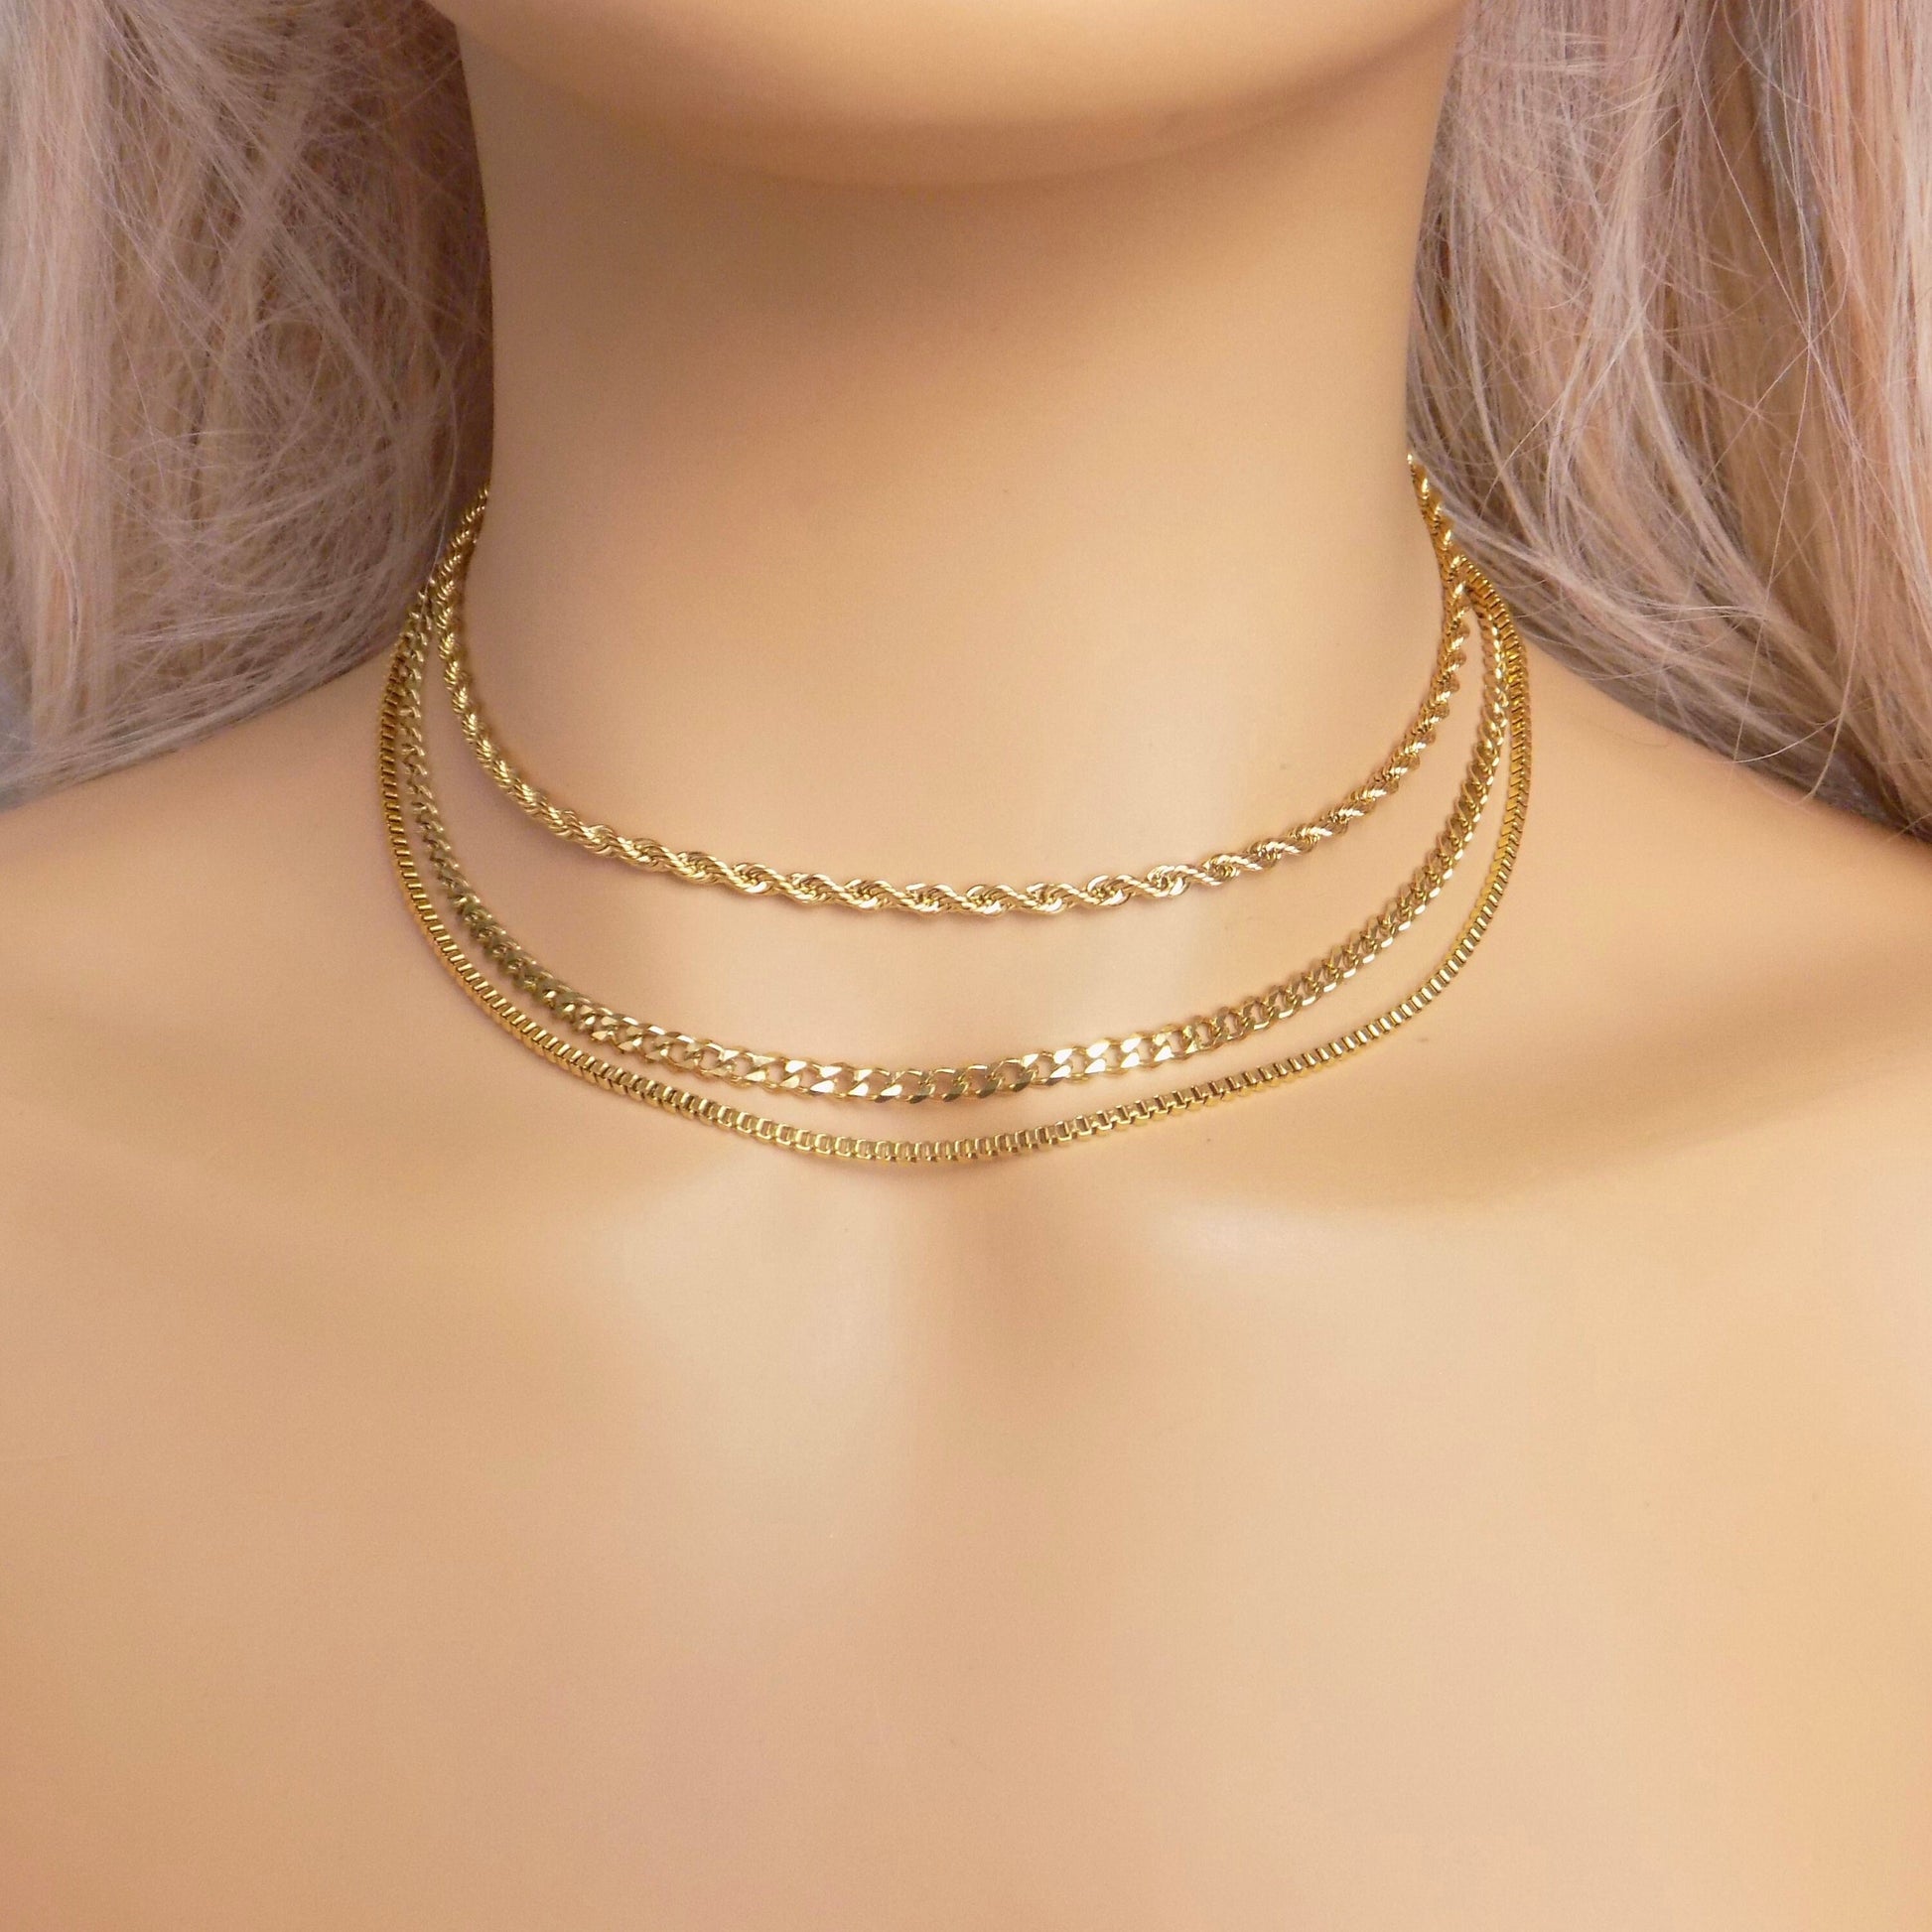 Dainty Gold Chokers For Women, 18K Gold Stainless Steel Chain, Twist Rope, Box, Flat Curb Chains, Finished Chain, Made to Order, M7-74